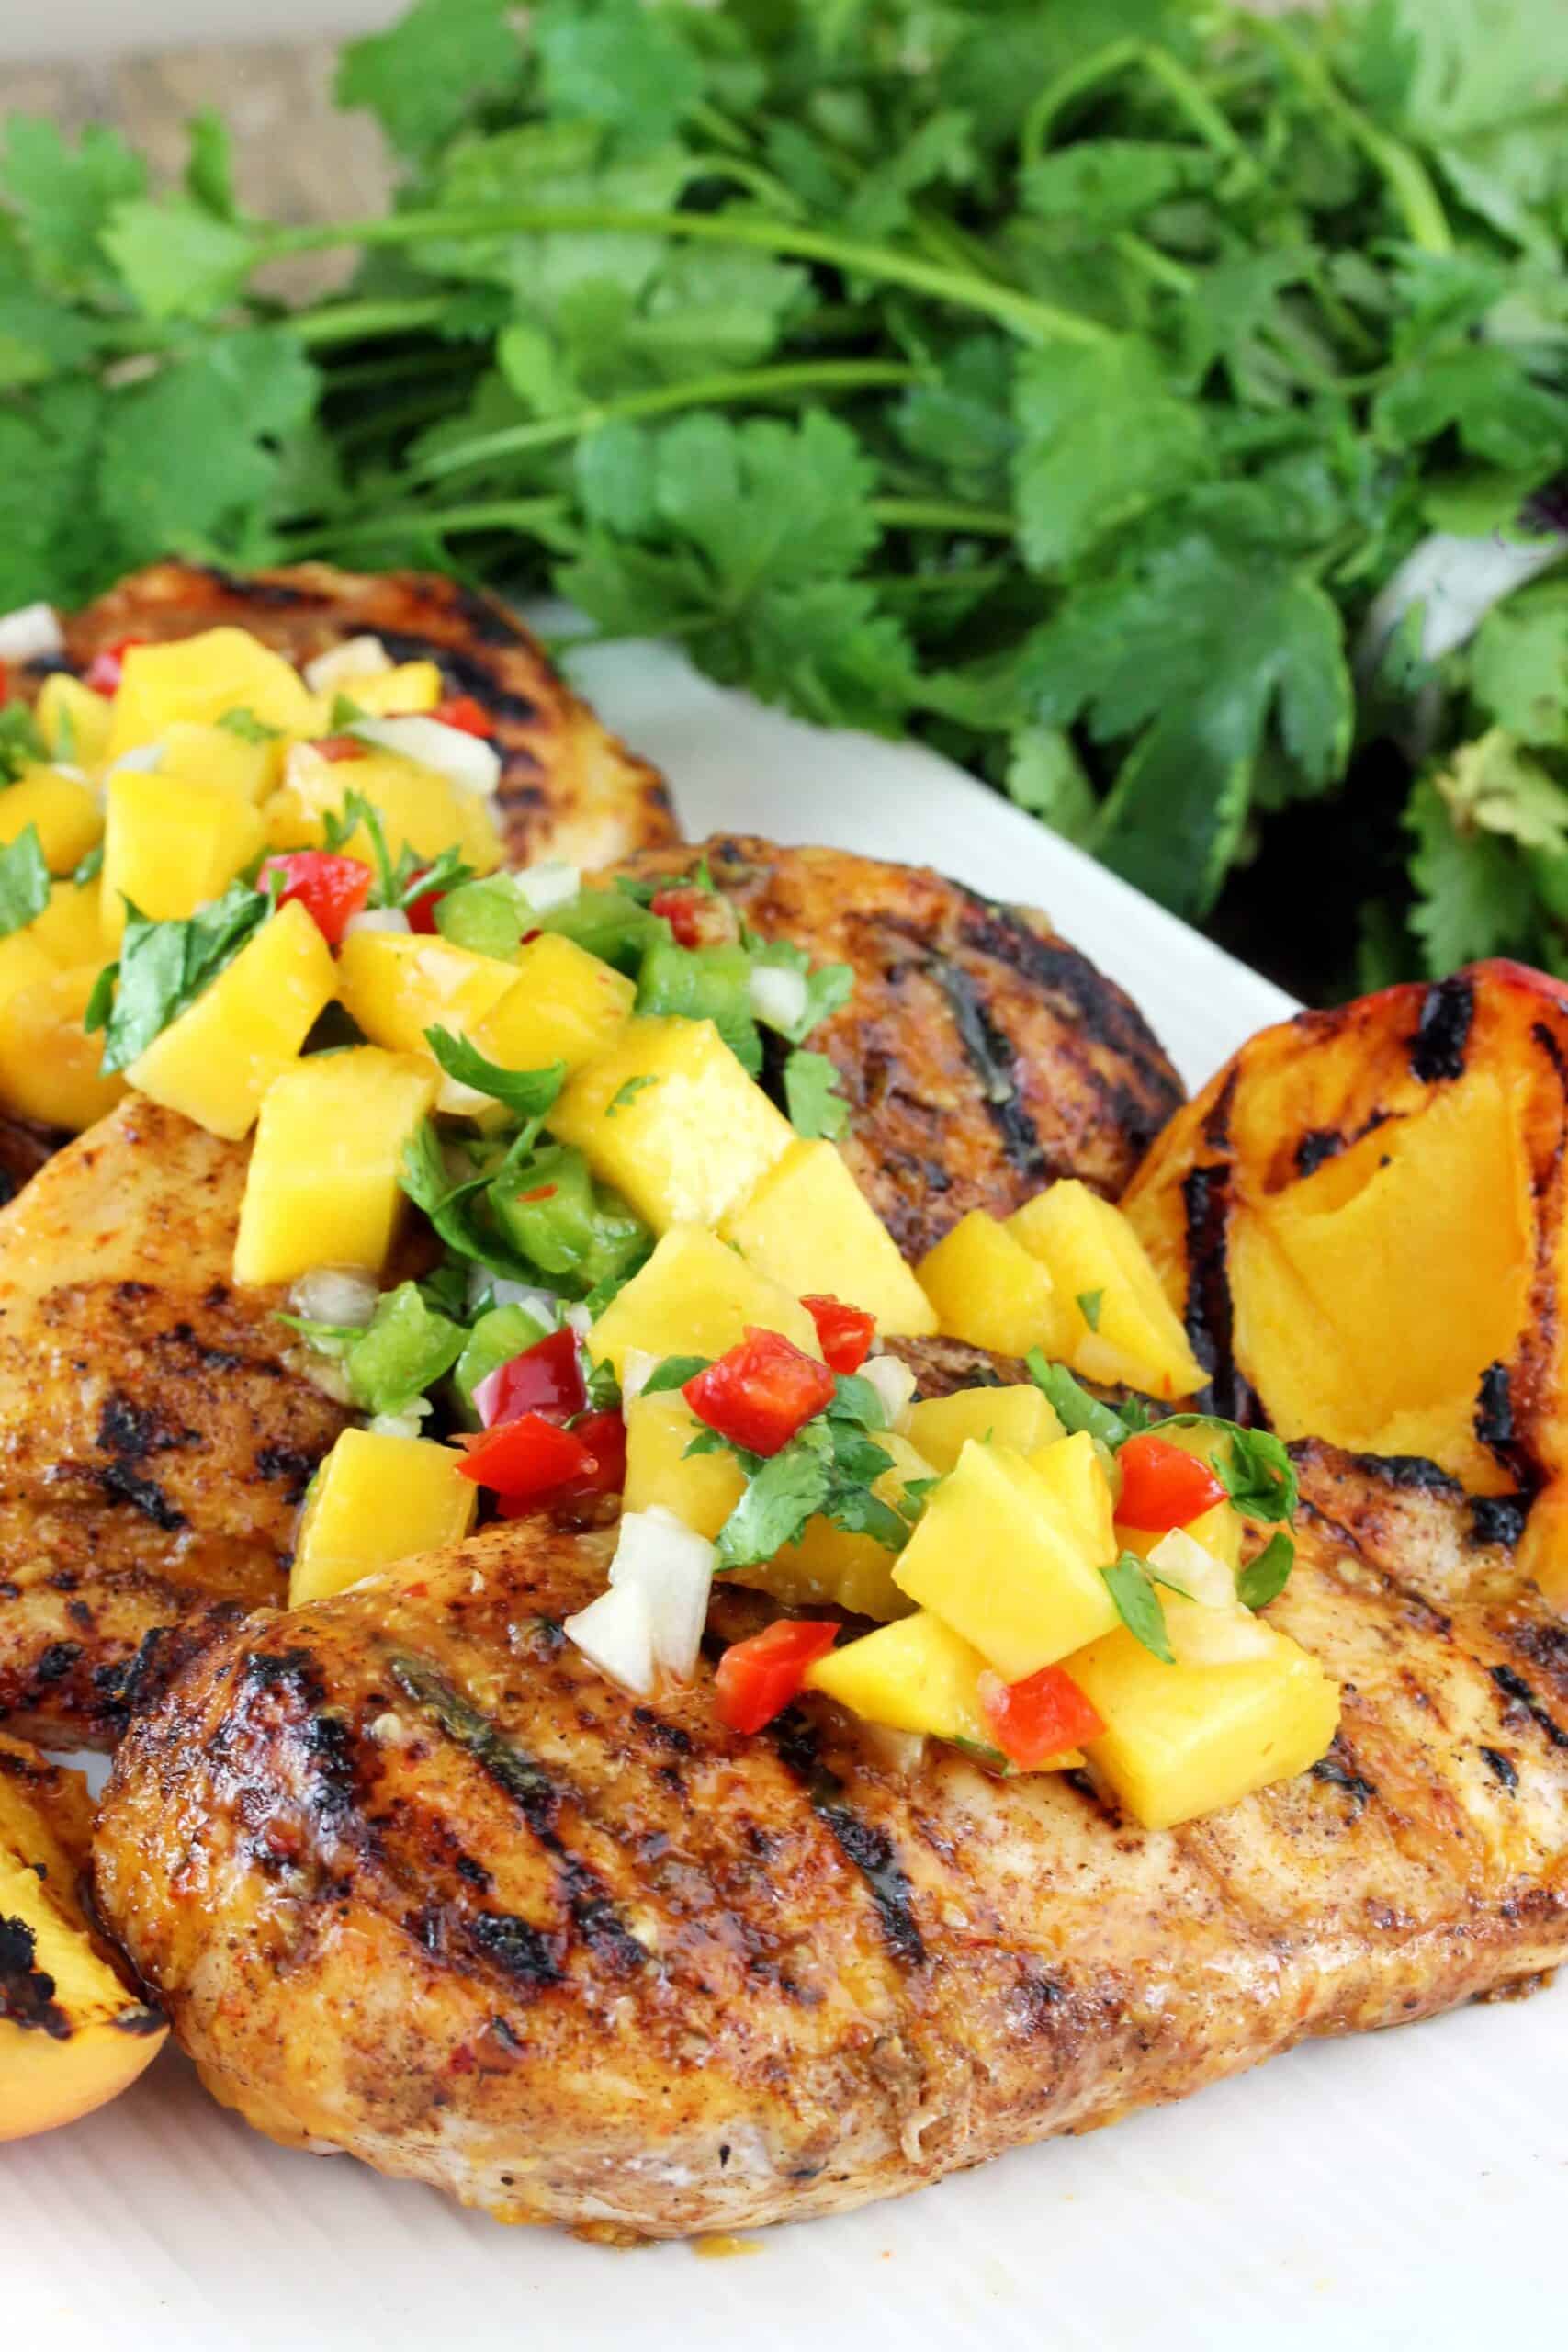 Chipotle-Peach Glazed Grilled chicken breasts on a plate is topped with peach salsa, cilantro in background